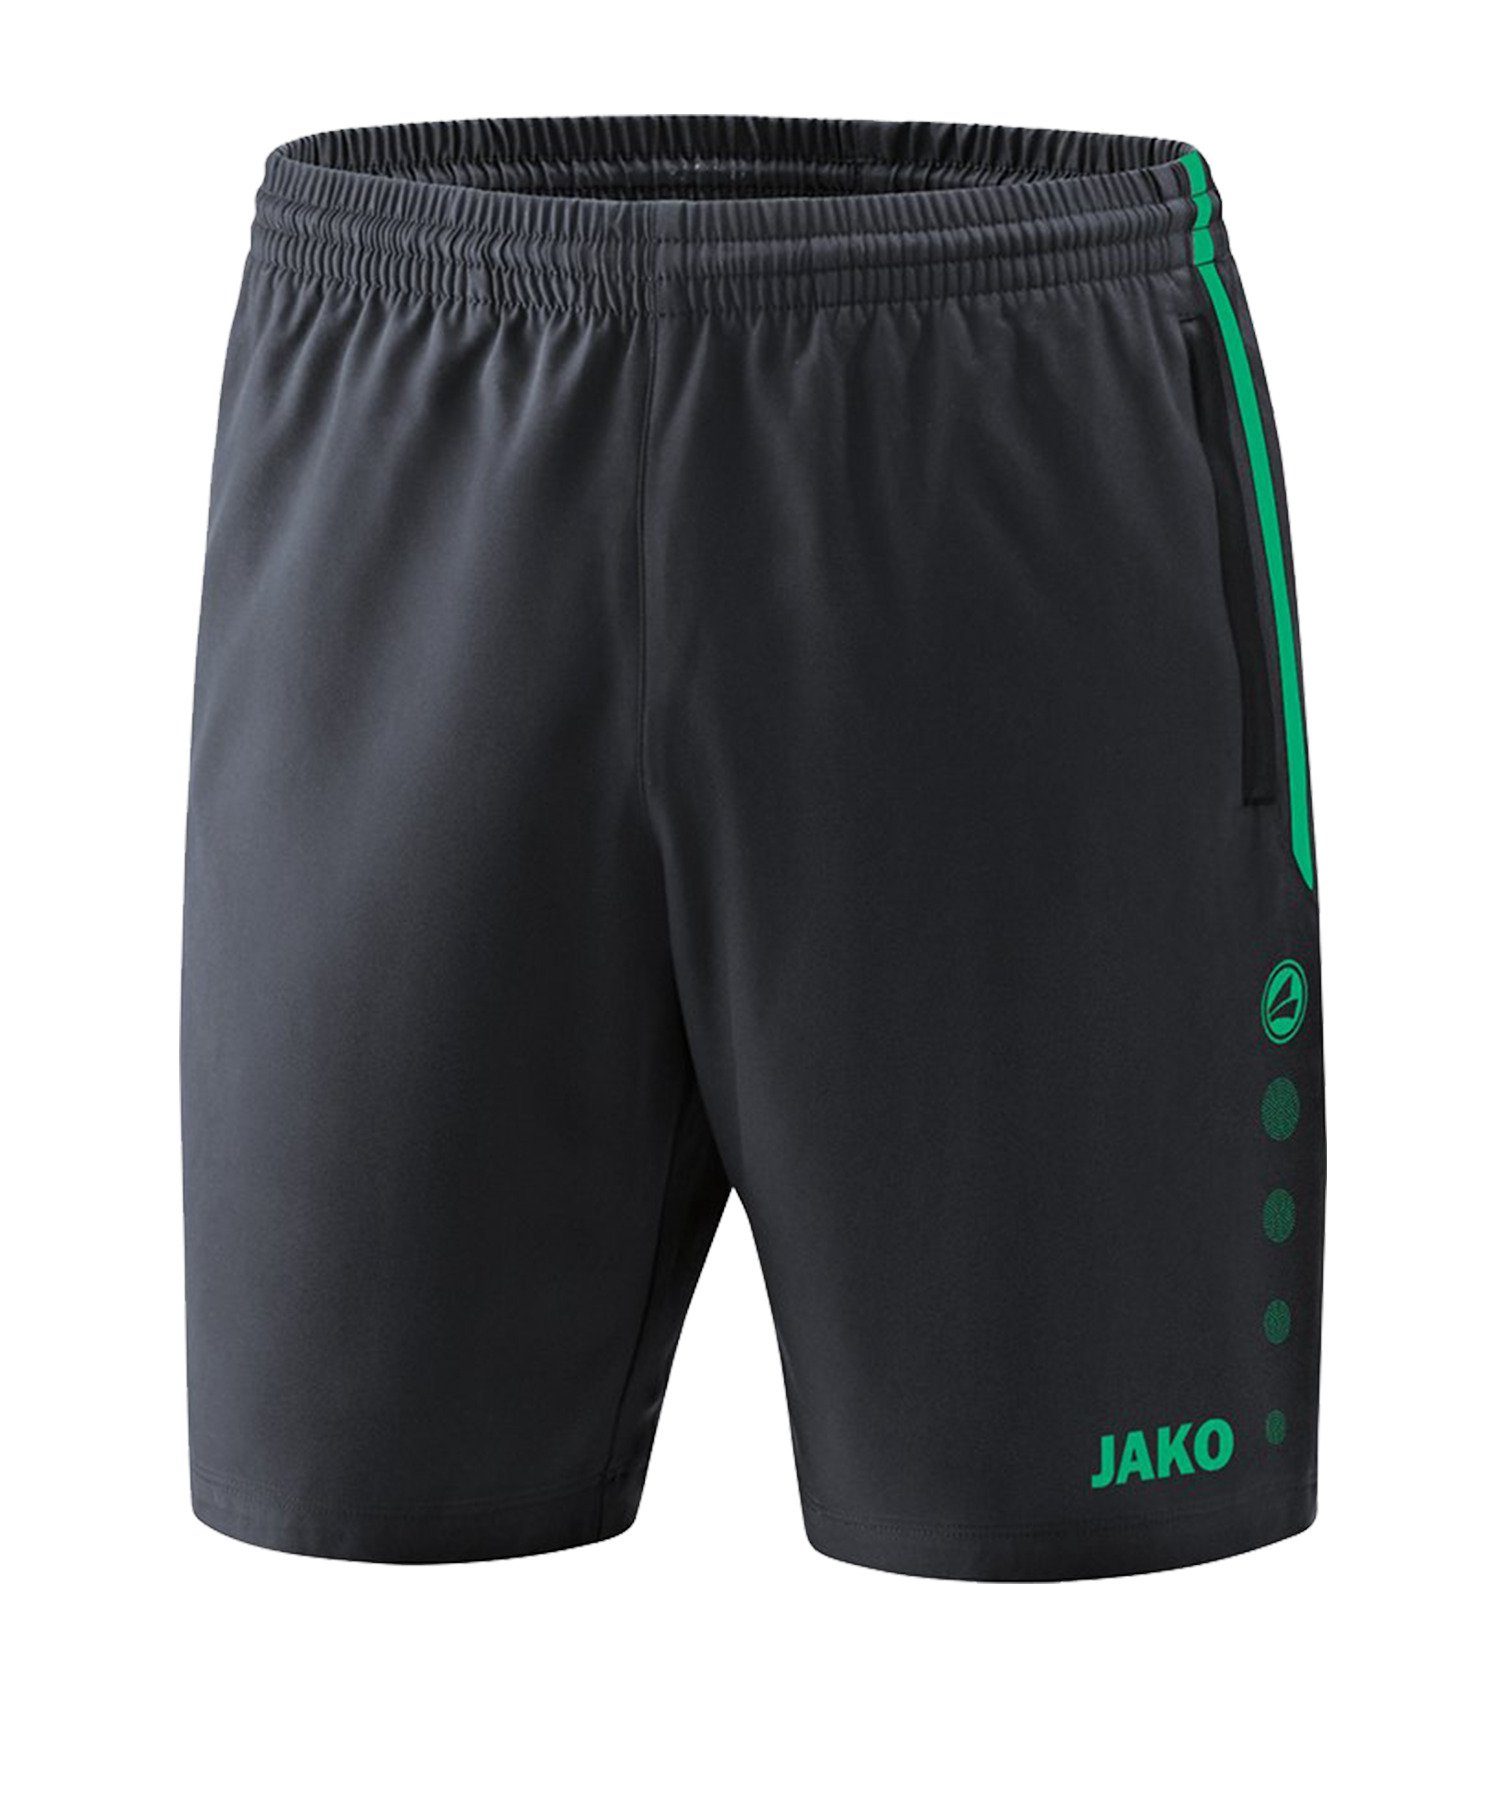 Jako Sporthose Competition Grautuerkis Short 2.0